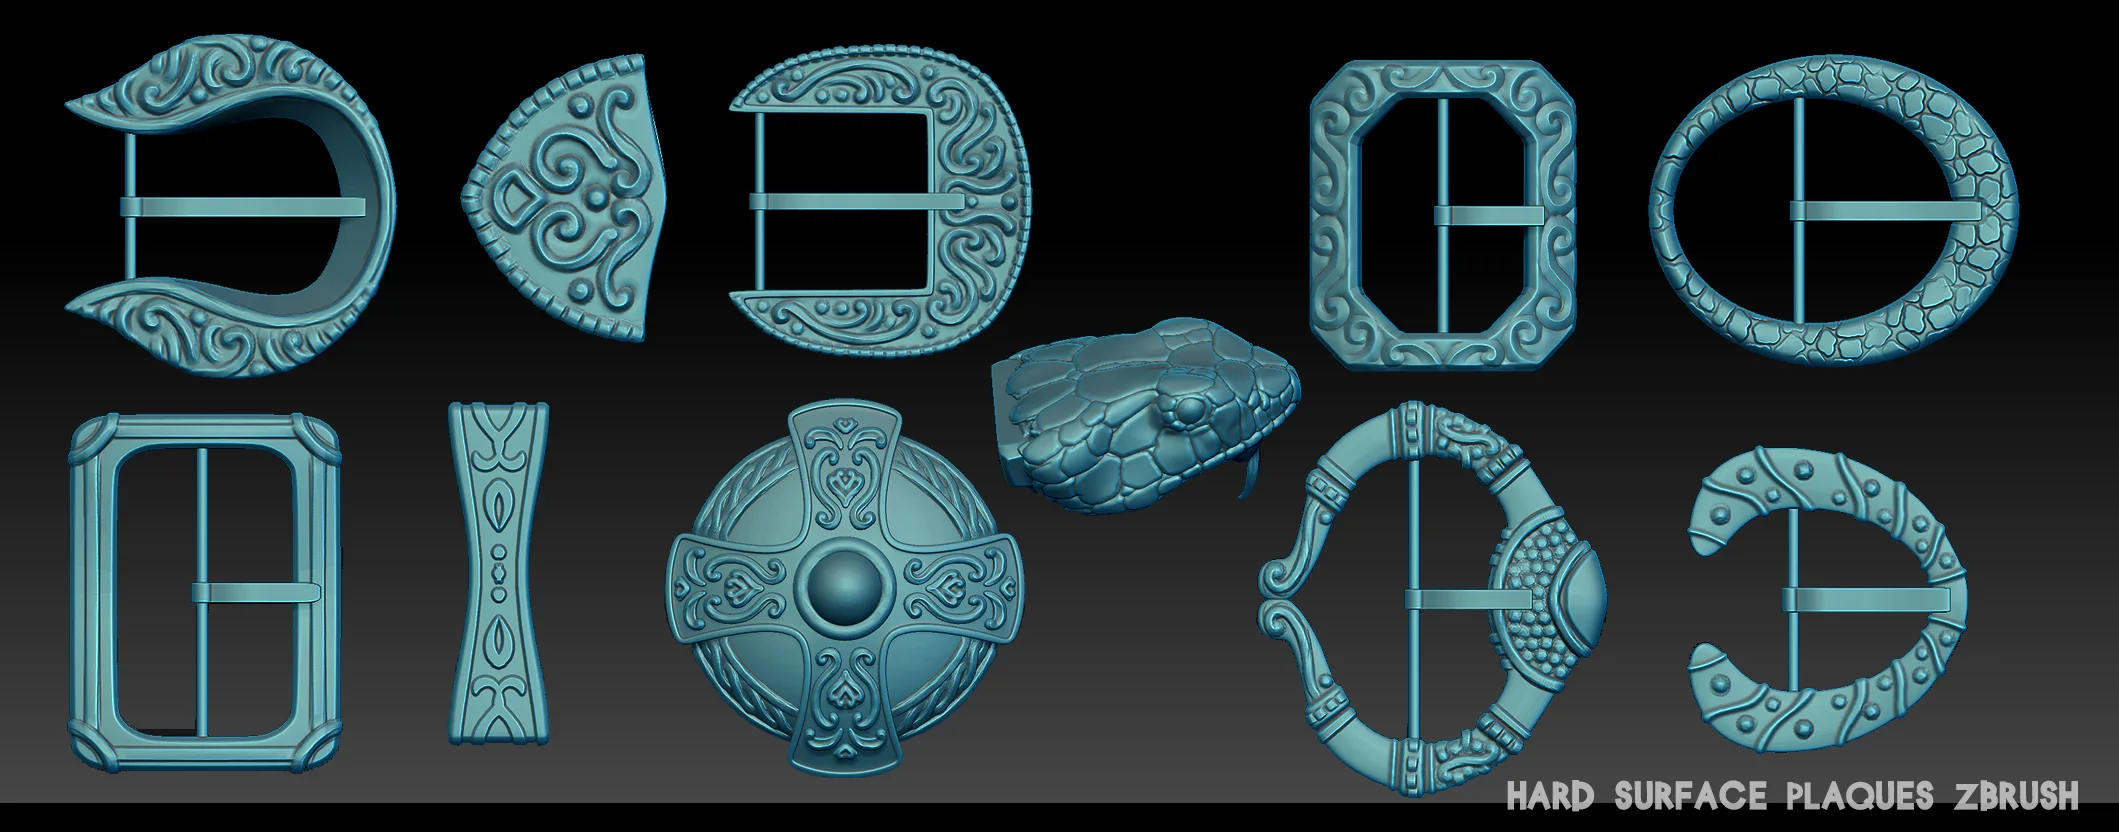 Hard Surface plaques Zbrush